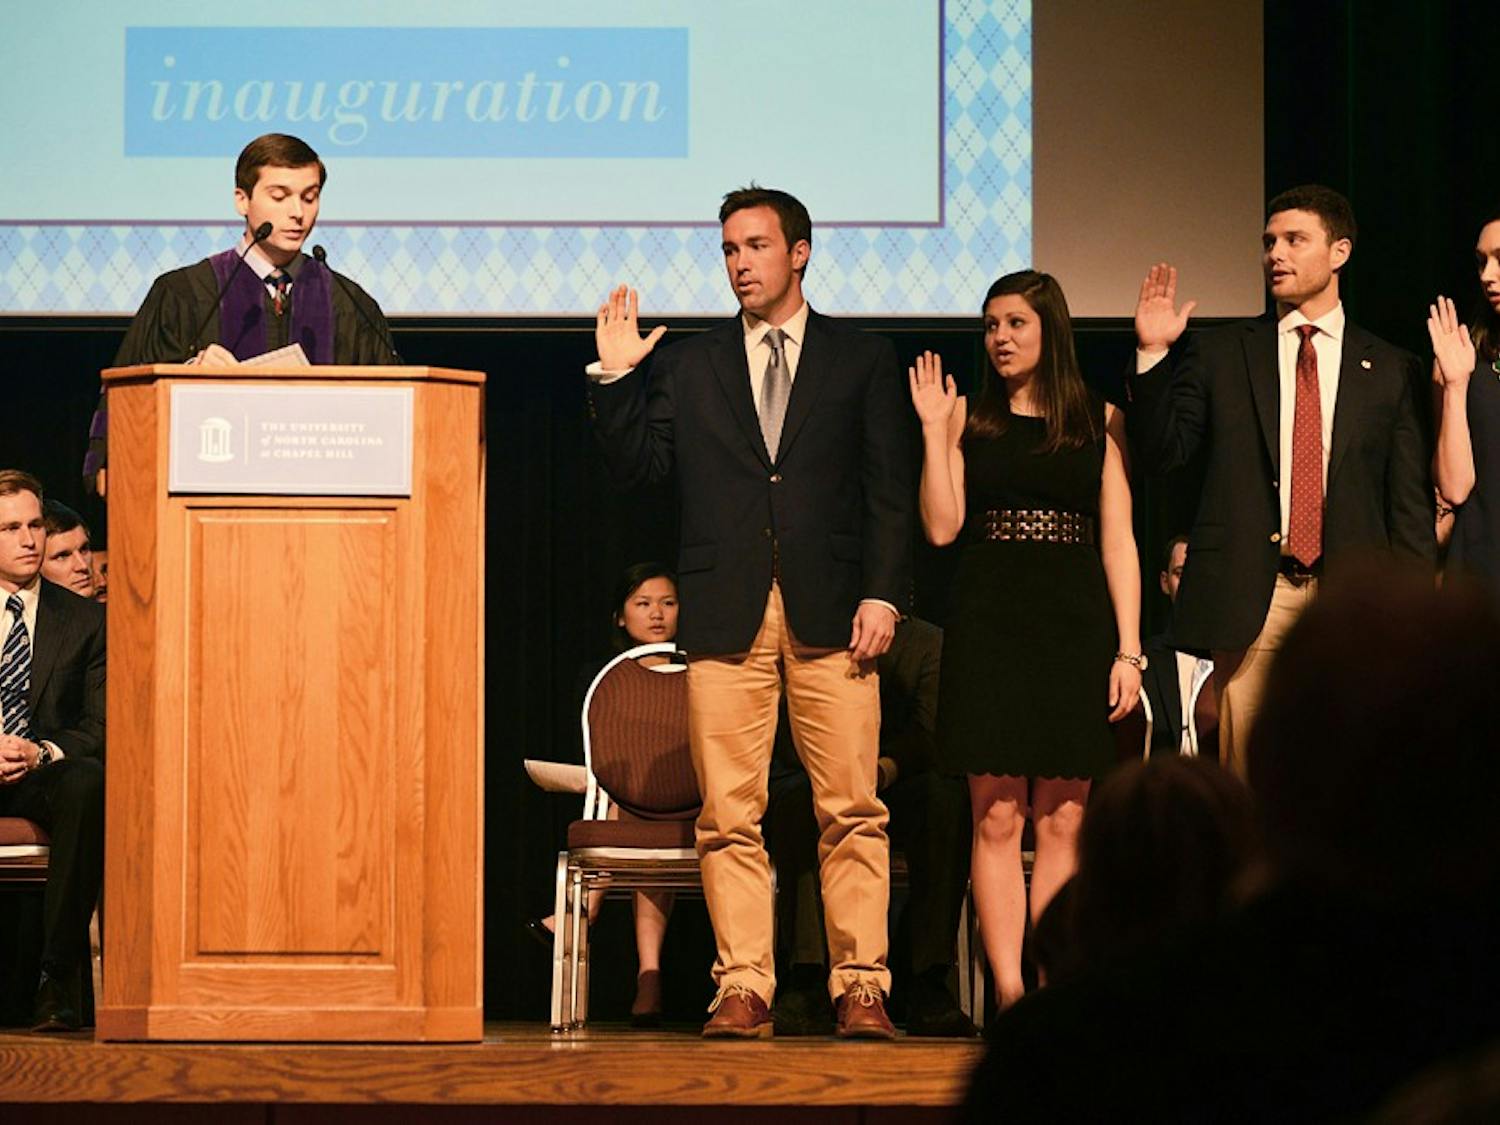 Junior Houston Summers taking his oath to office as UNC Student Body President for the 2015-2016 academic year in the Great Hall on Tuesday. He succeed former SBP Andrew Powell. 